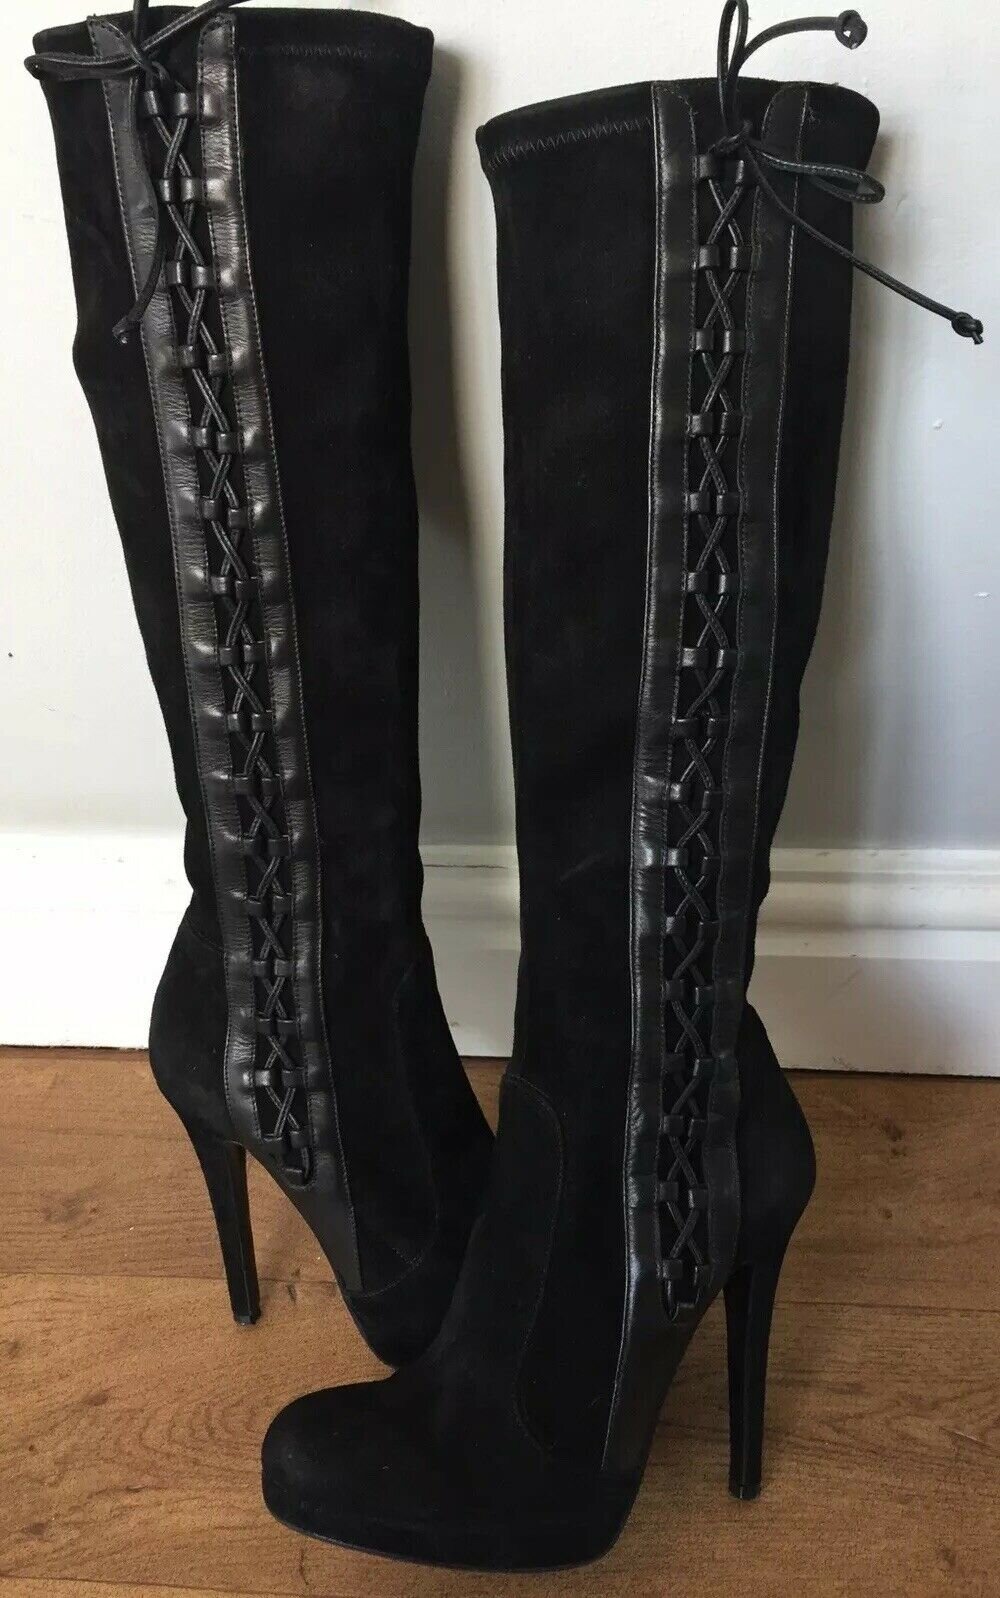 L.K. Bennett The Edgware Knee-High Boots in Black Suede — UFO No More